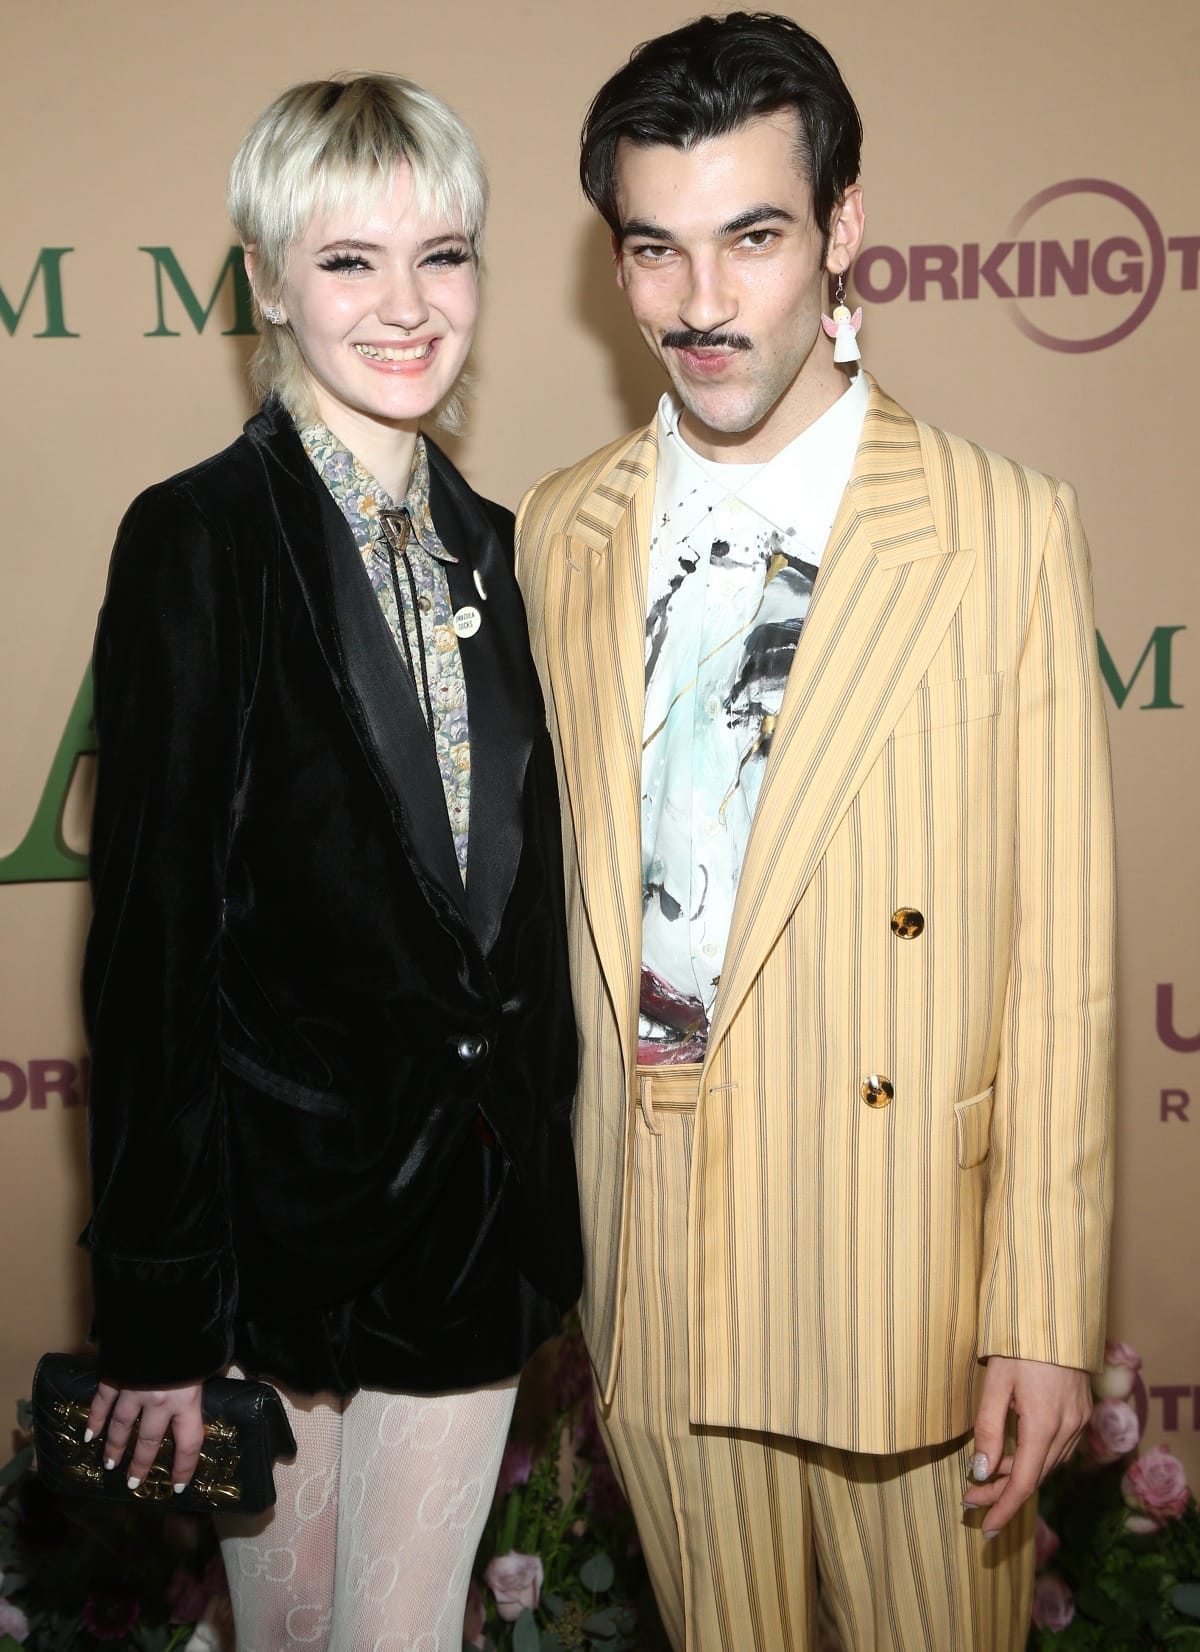 Julia Hutsell and her boyfriend Leo Reilly at the premiere of Emma